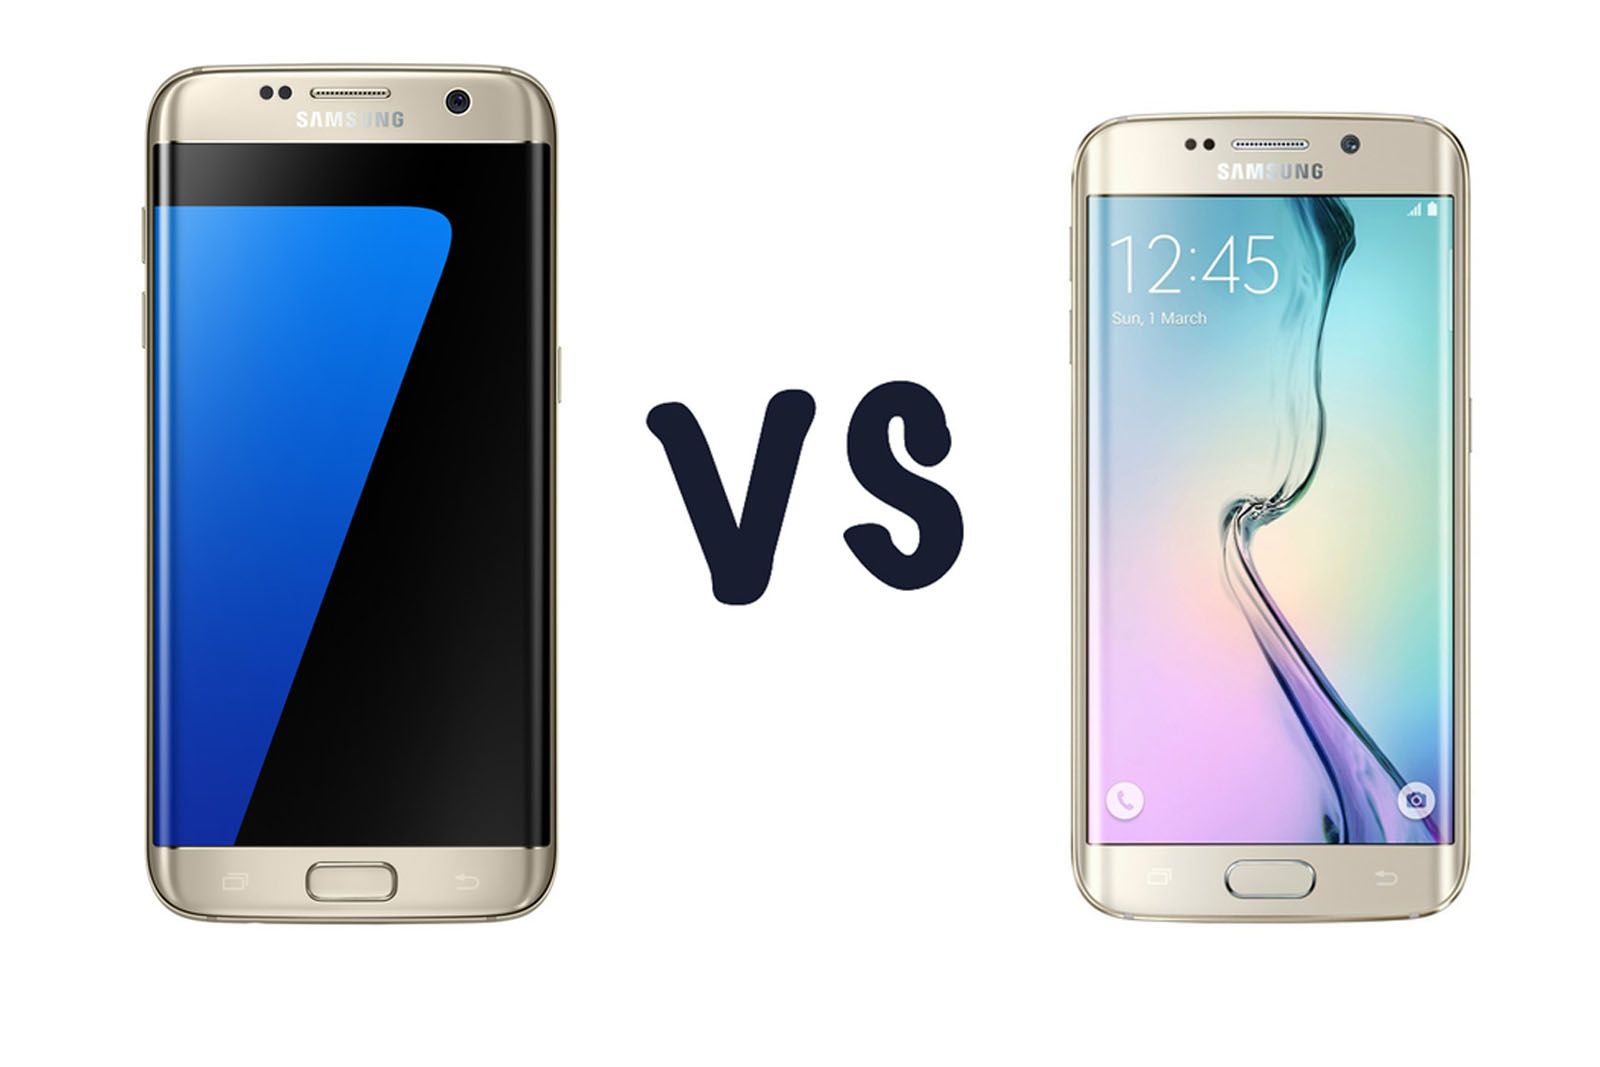 samsung galaxy s7 edge vs galaxy s6 edge what s the difference image 1